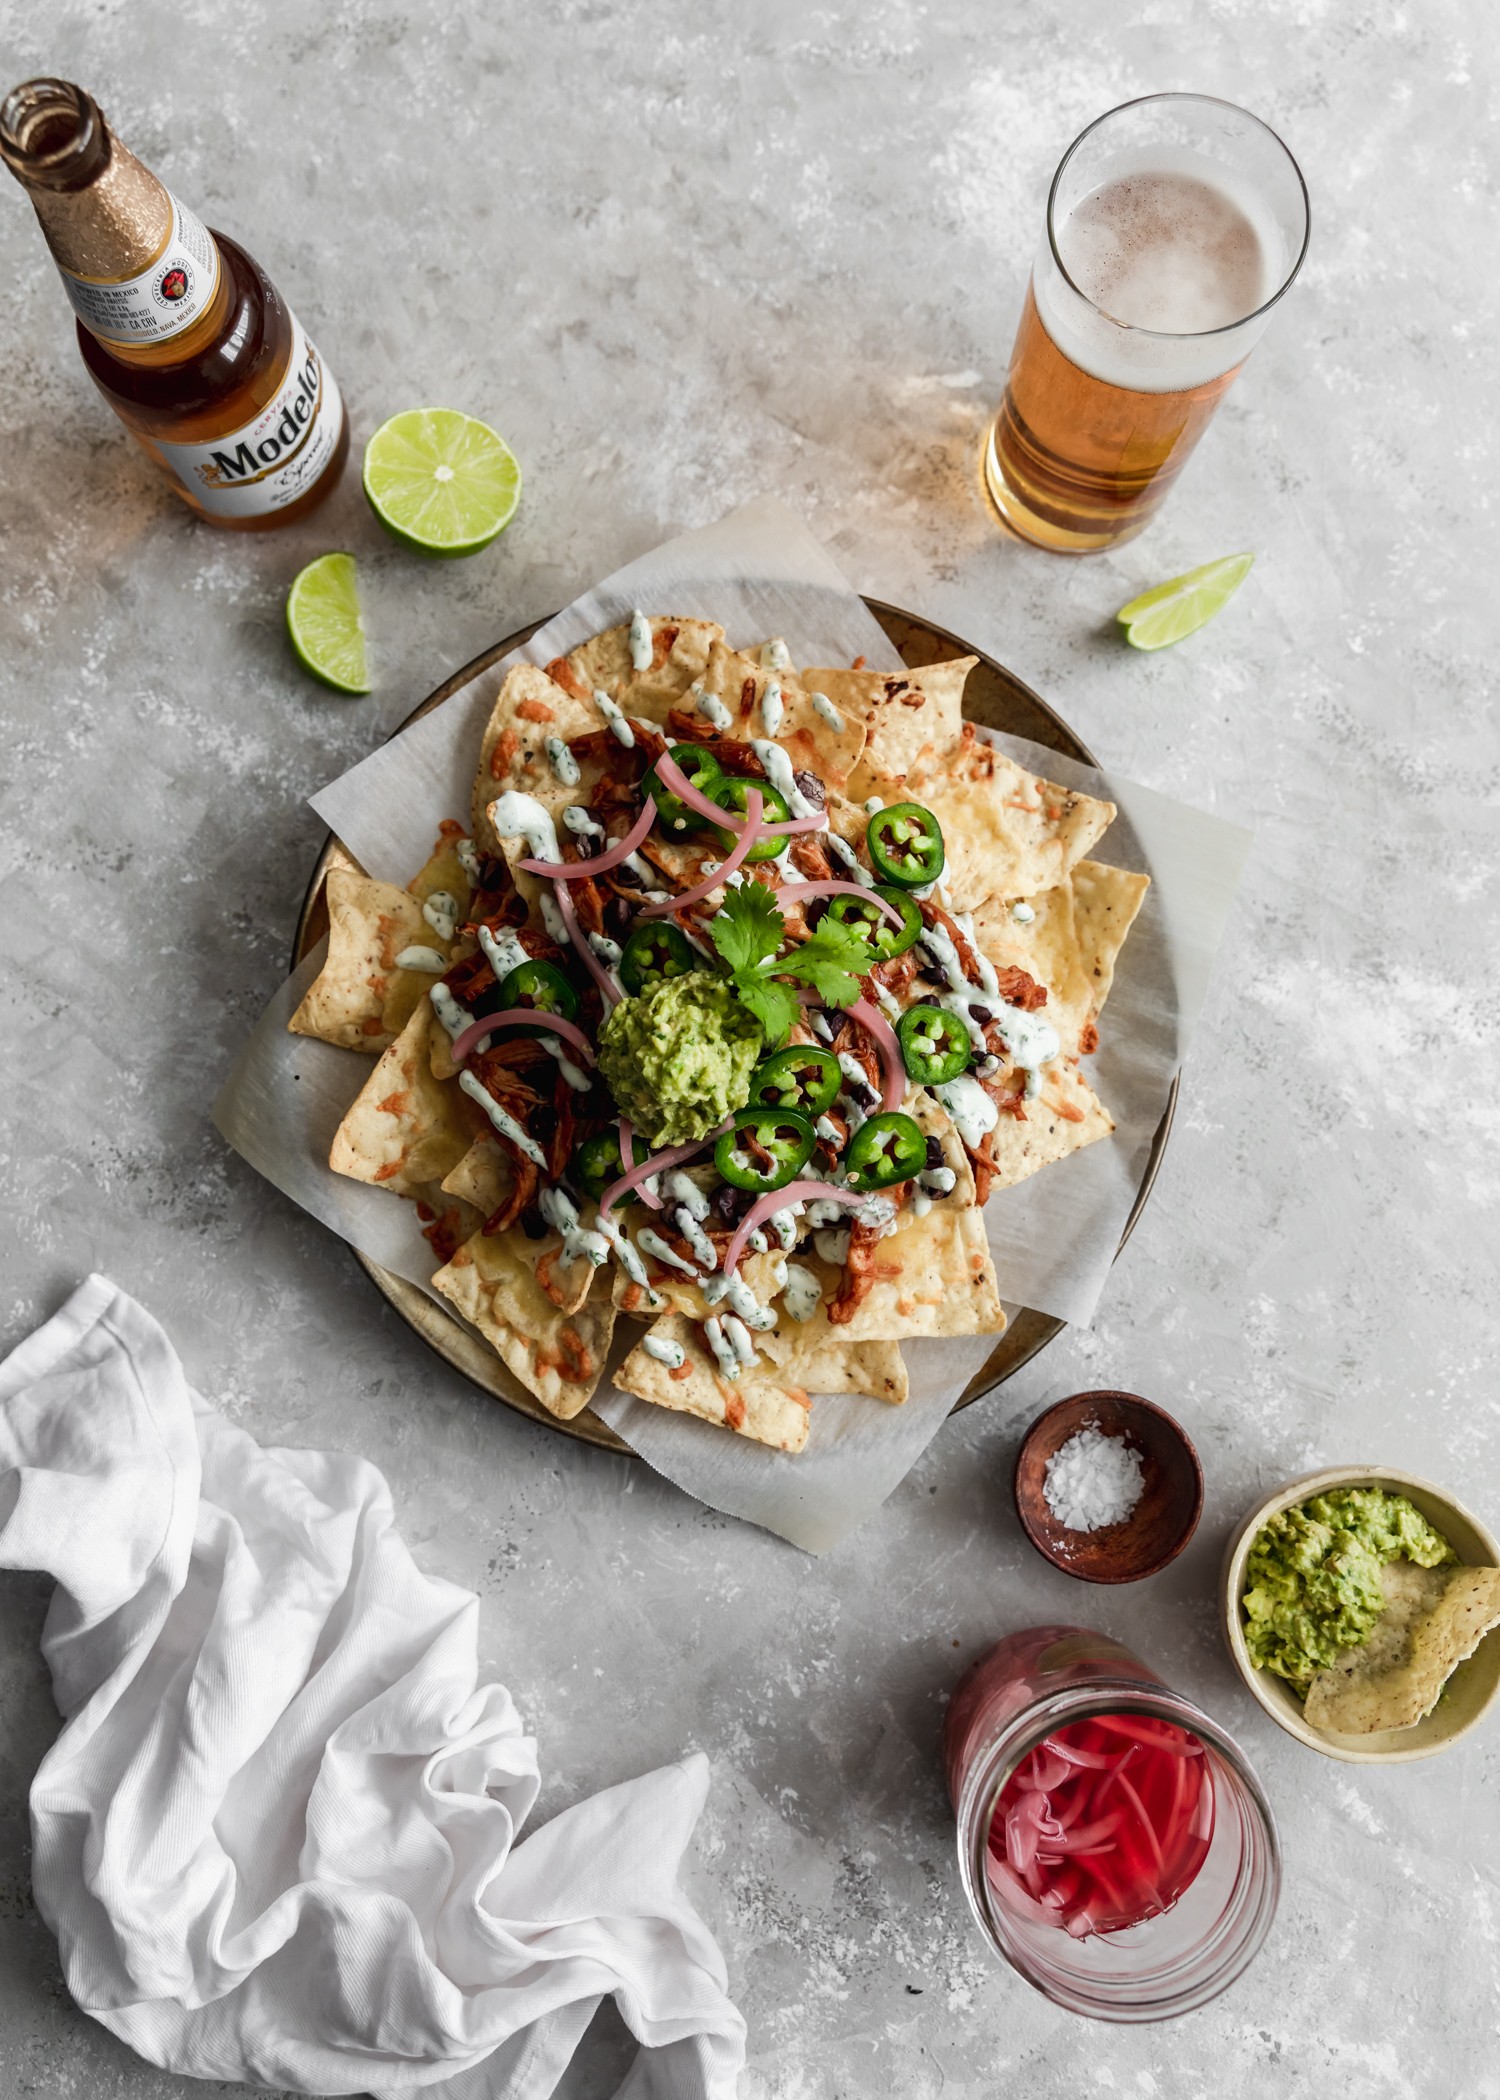 A bird's eye picture of a plate of tortilla chips topped with cheese, meat, and veggies on a grey counter surrounded by beer and a bowl of guacamole.